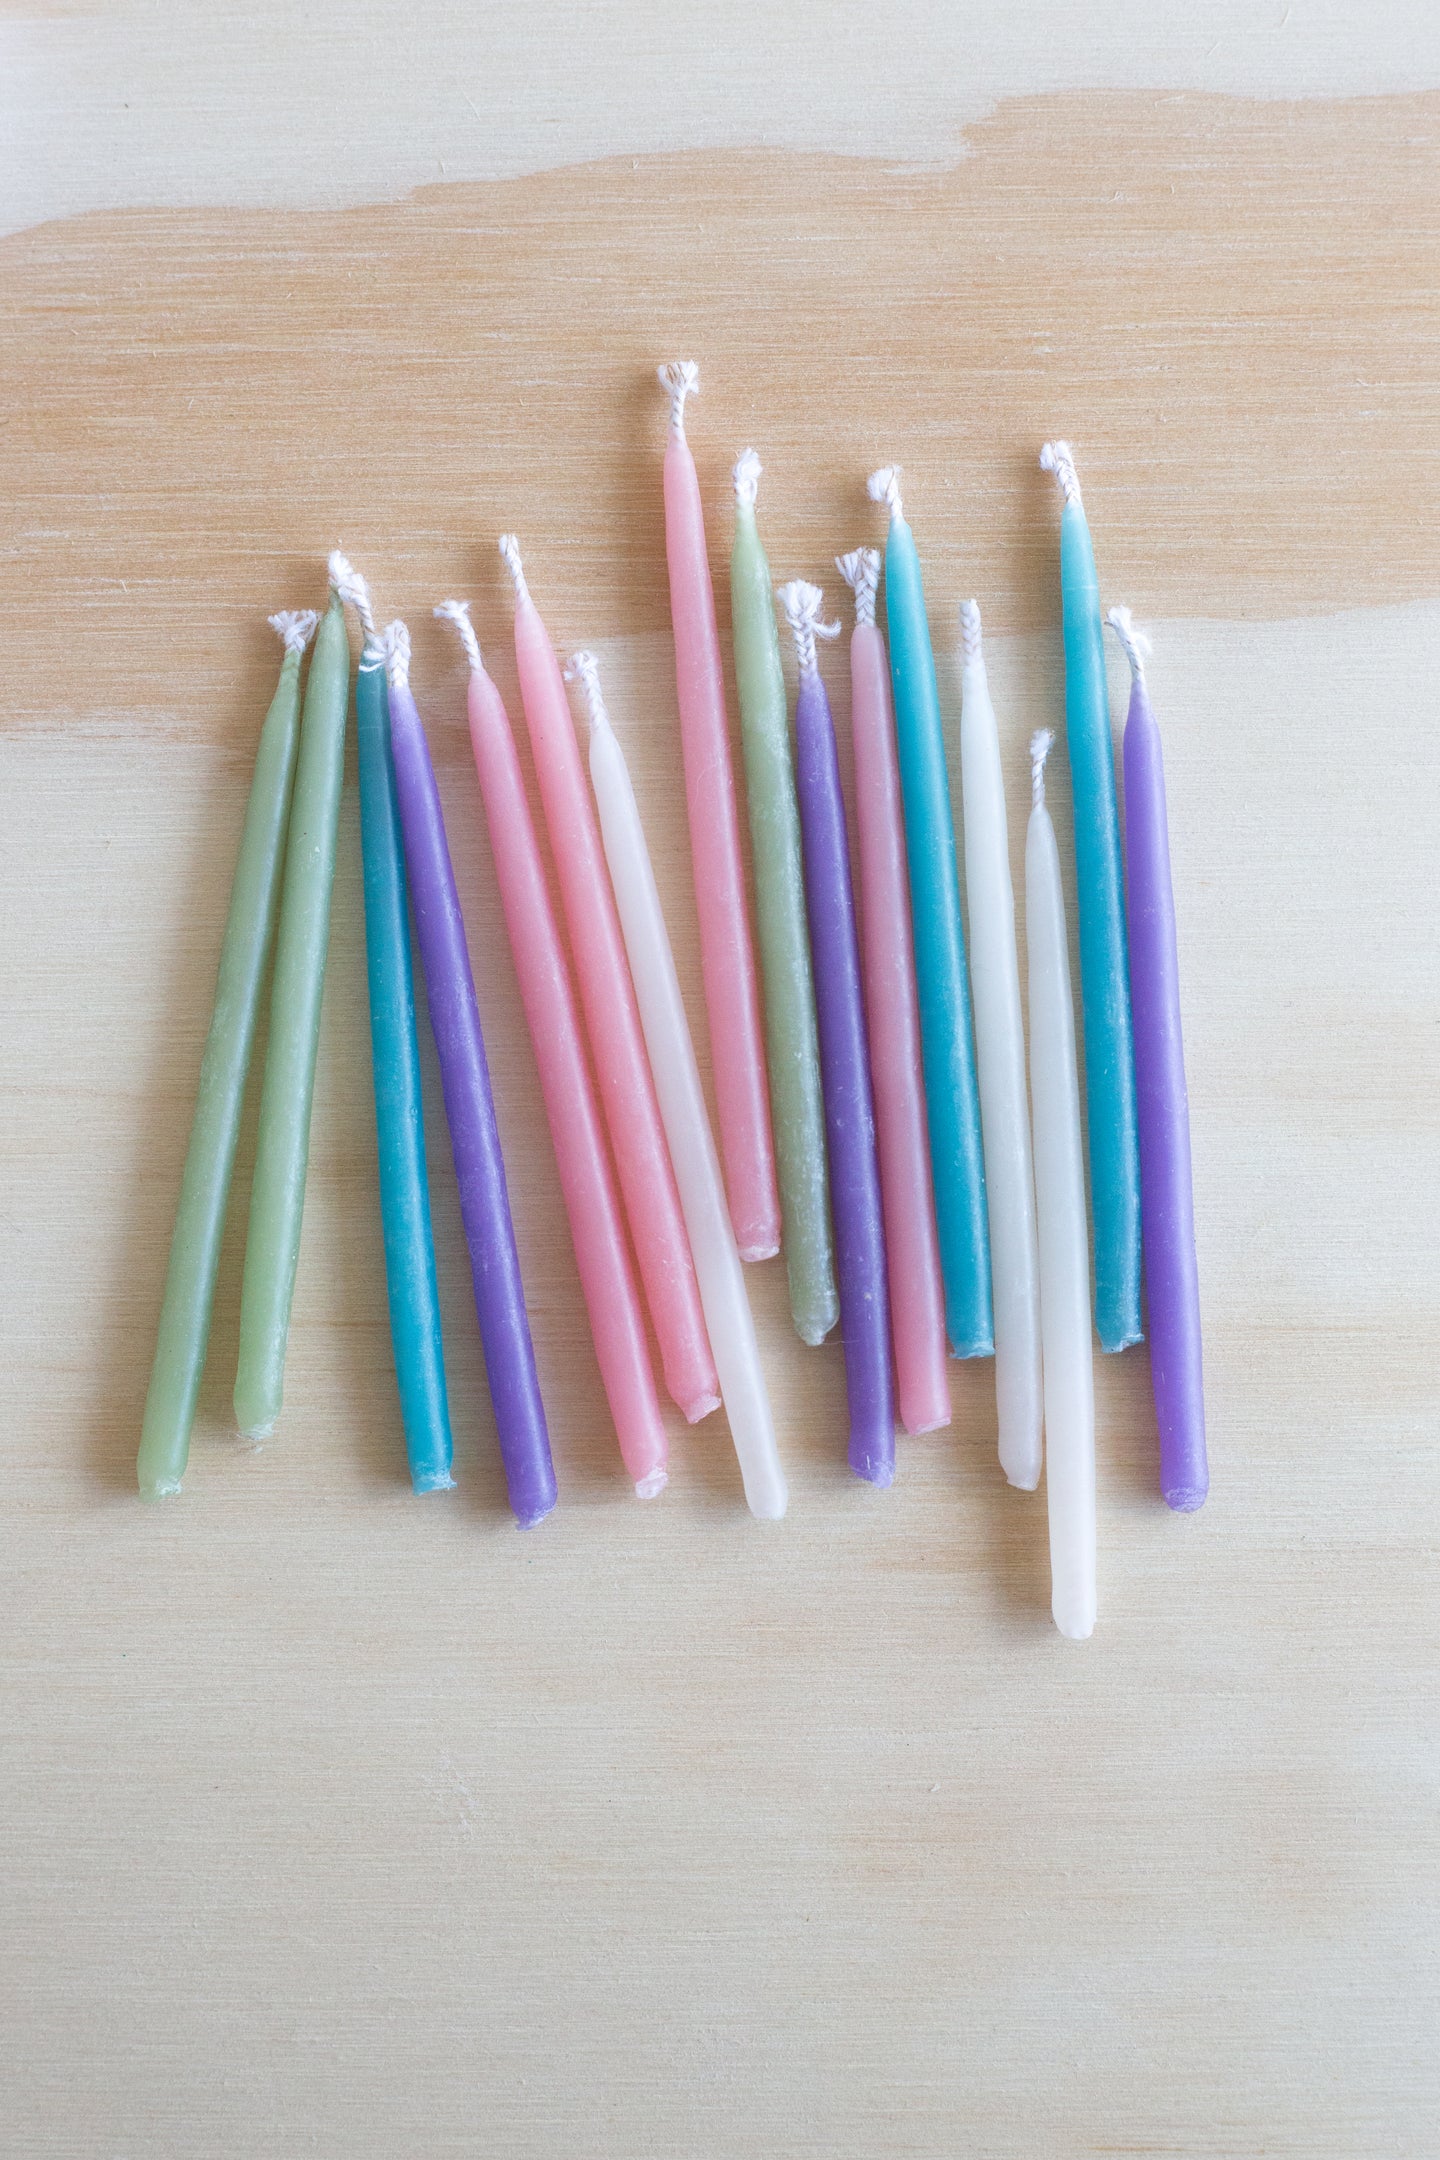 Beeswax Birthday Candles - 3 Colors Available